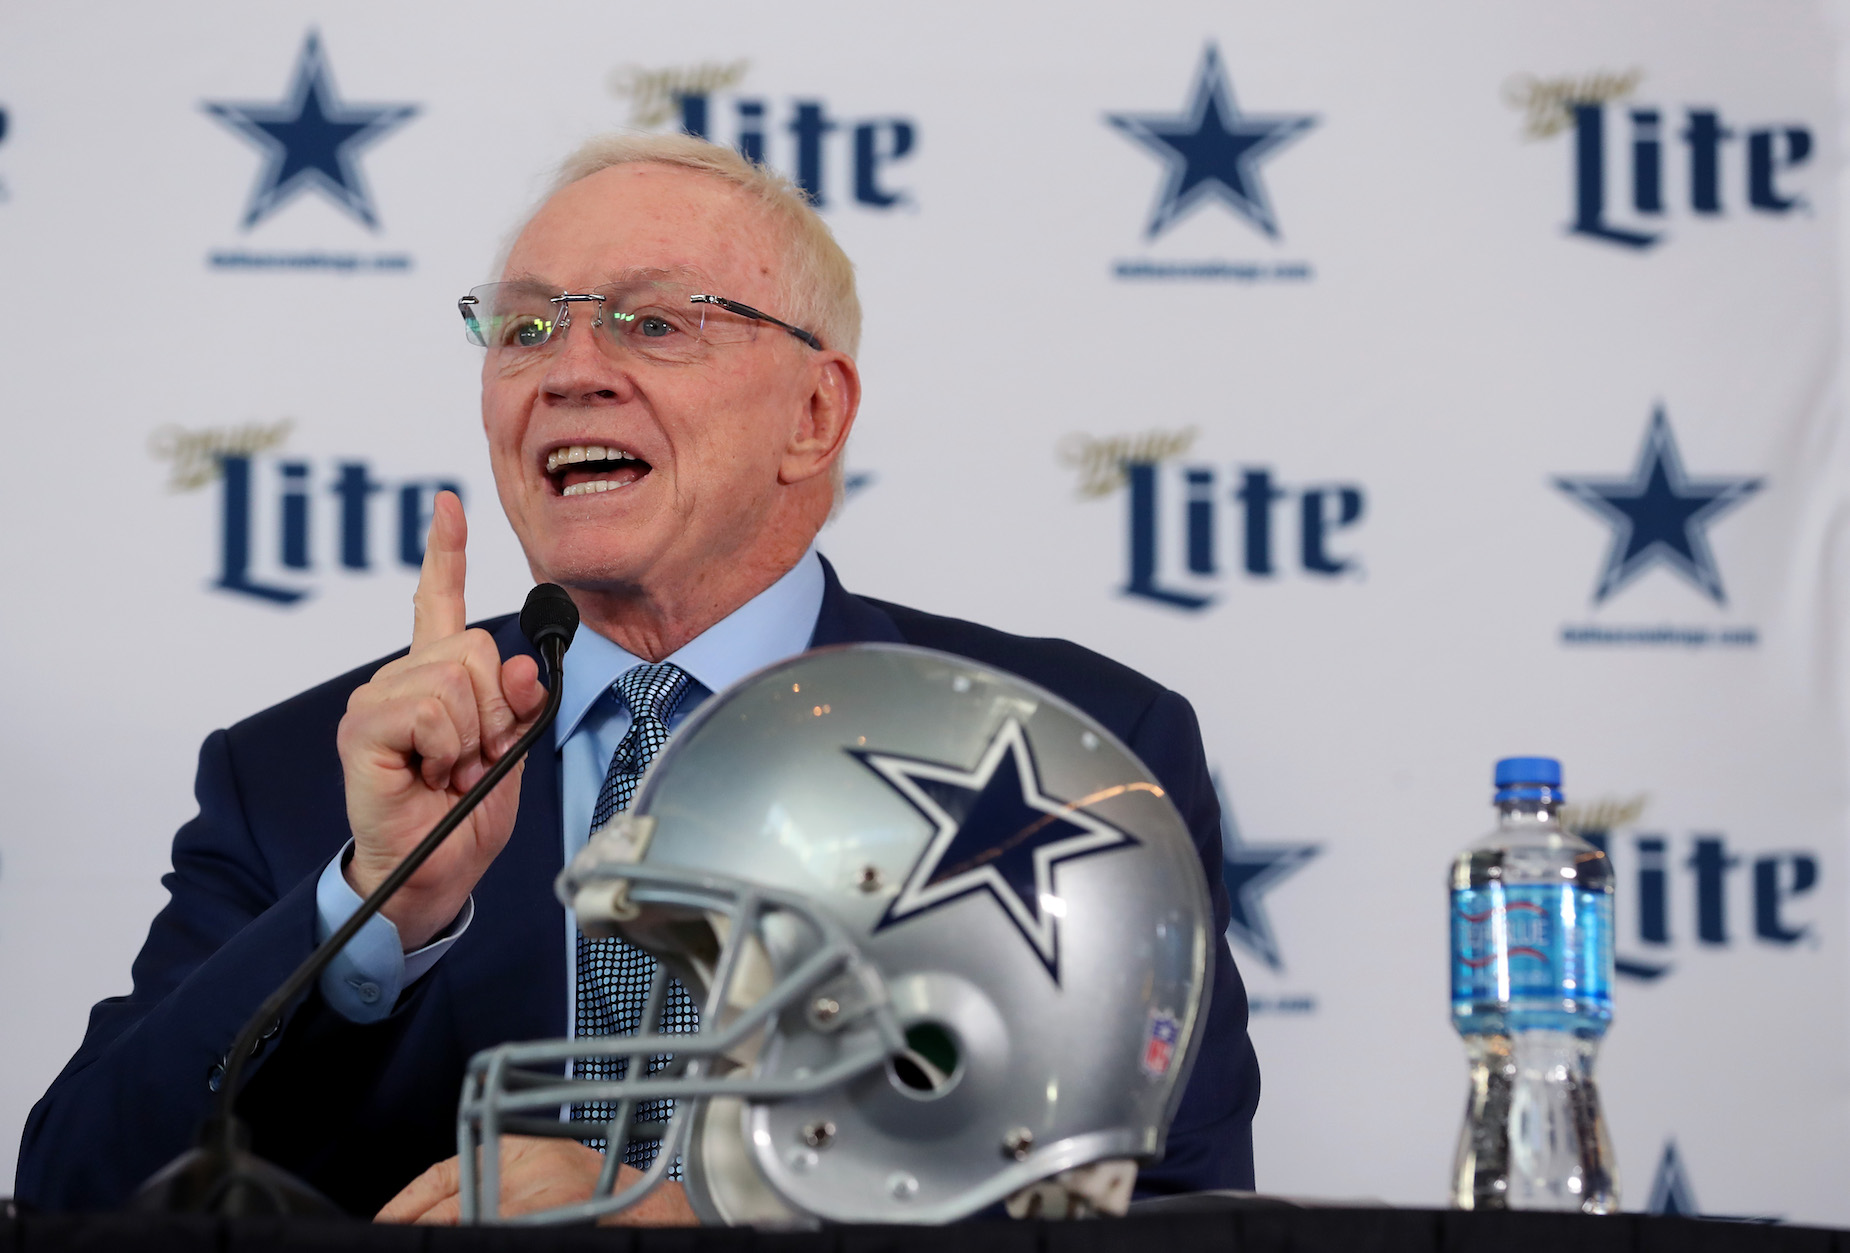 Jerry Jones doesn't see a problem with some teams having fans in the stands for the 2020 NFL season.